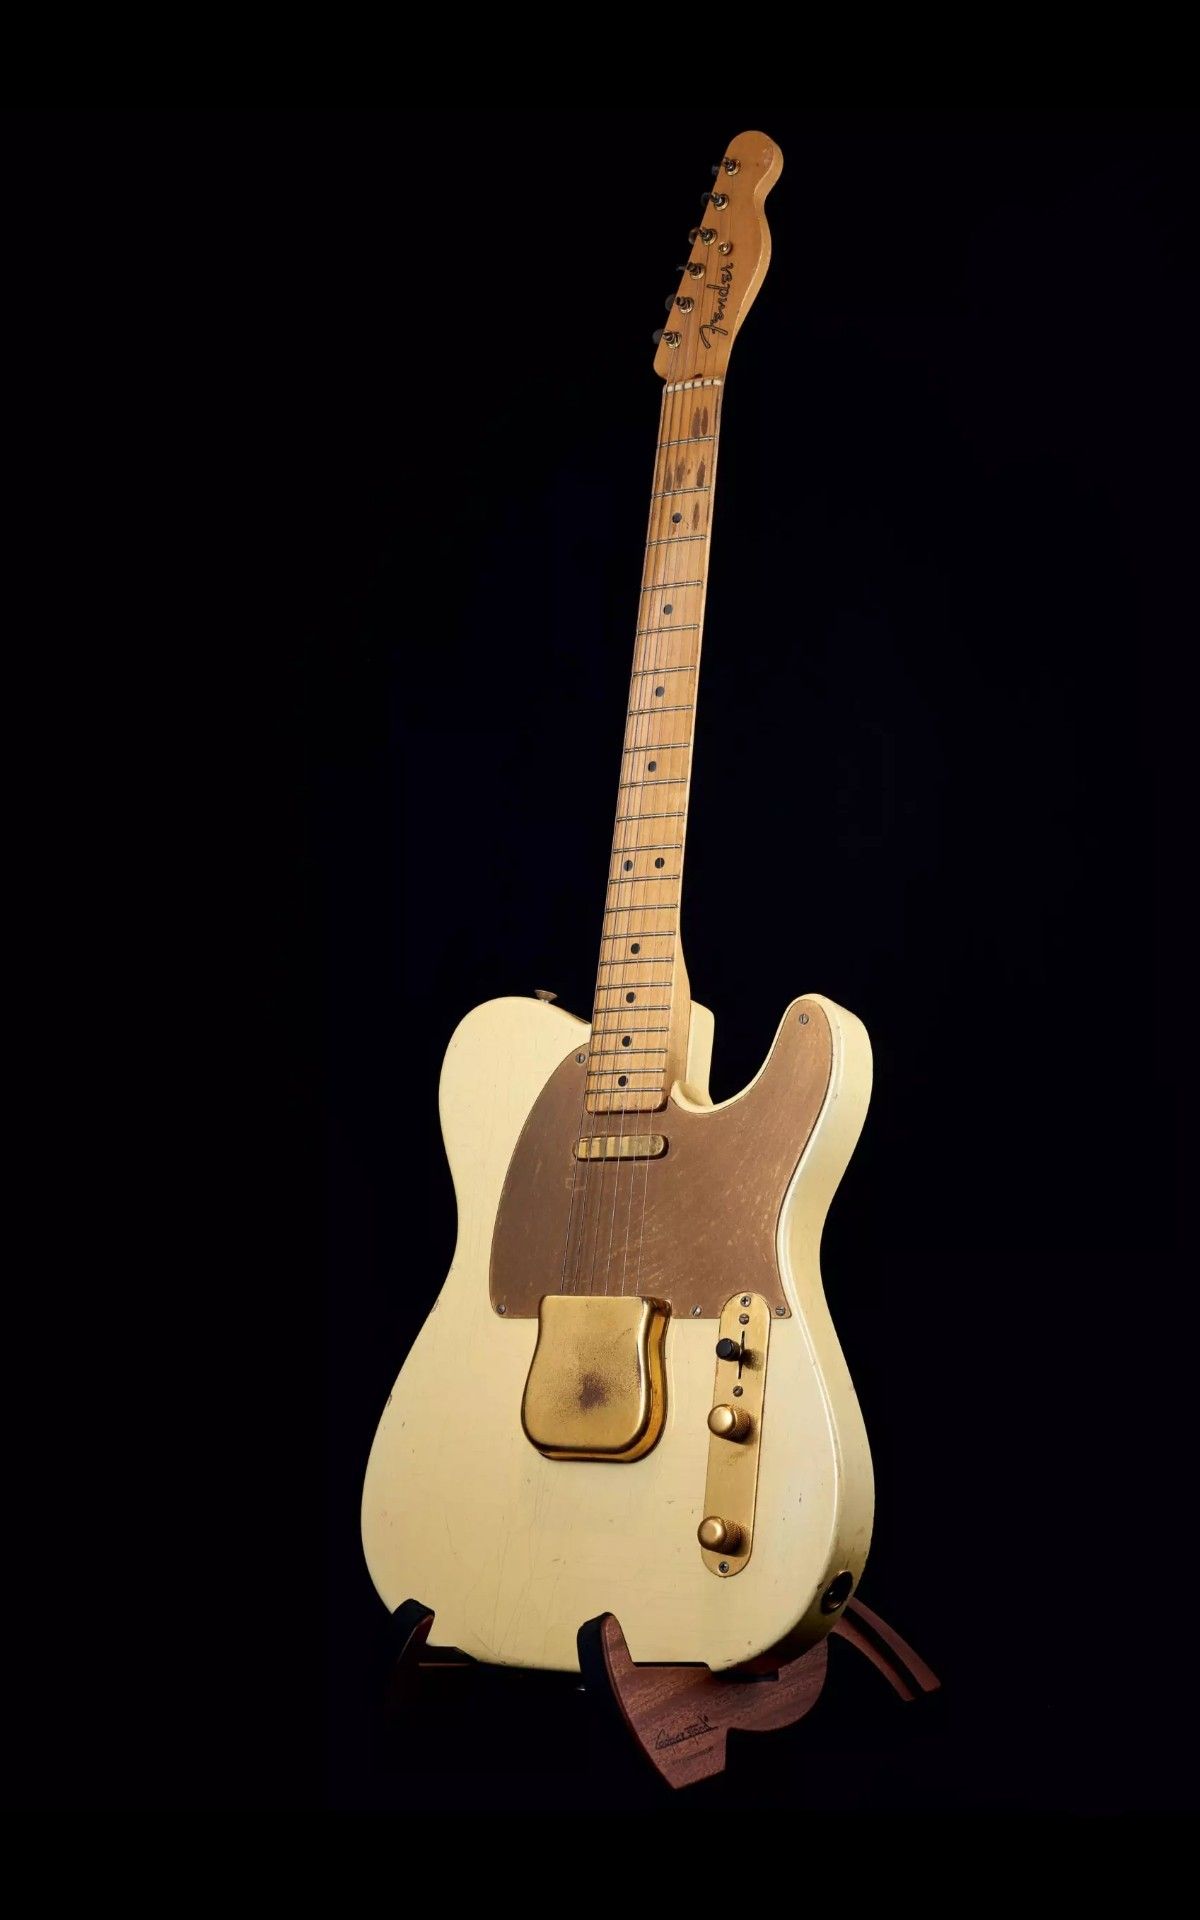 Telecaster Love Thread, No Archtops Allowed-416e4c3d4dc4402626a0ed3cac6487f2-jpg